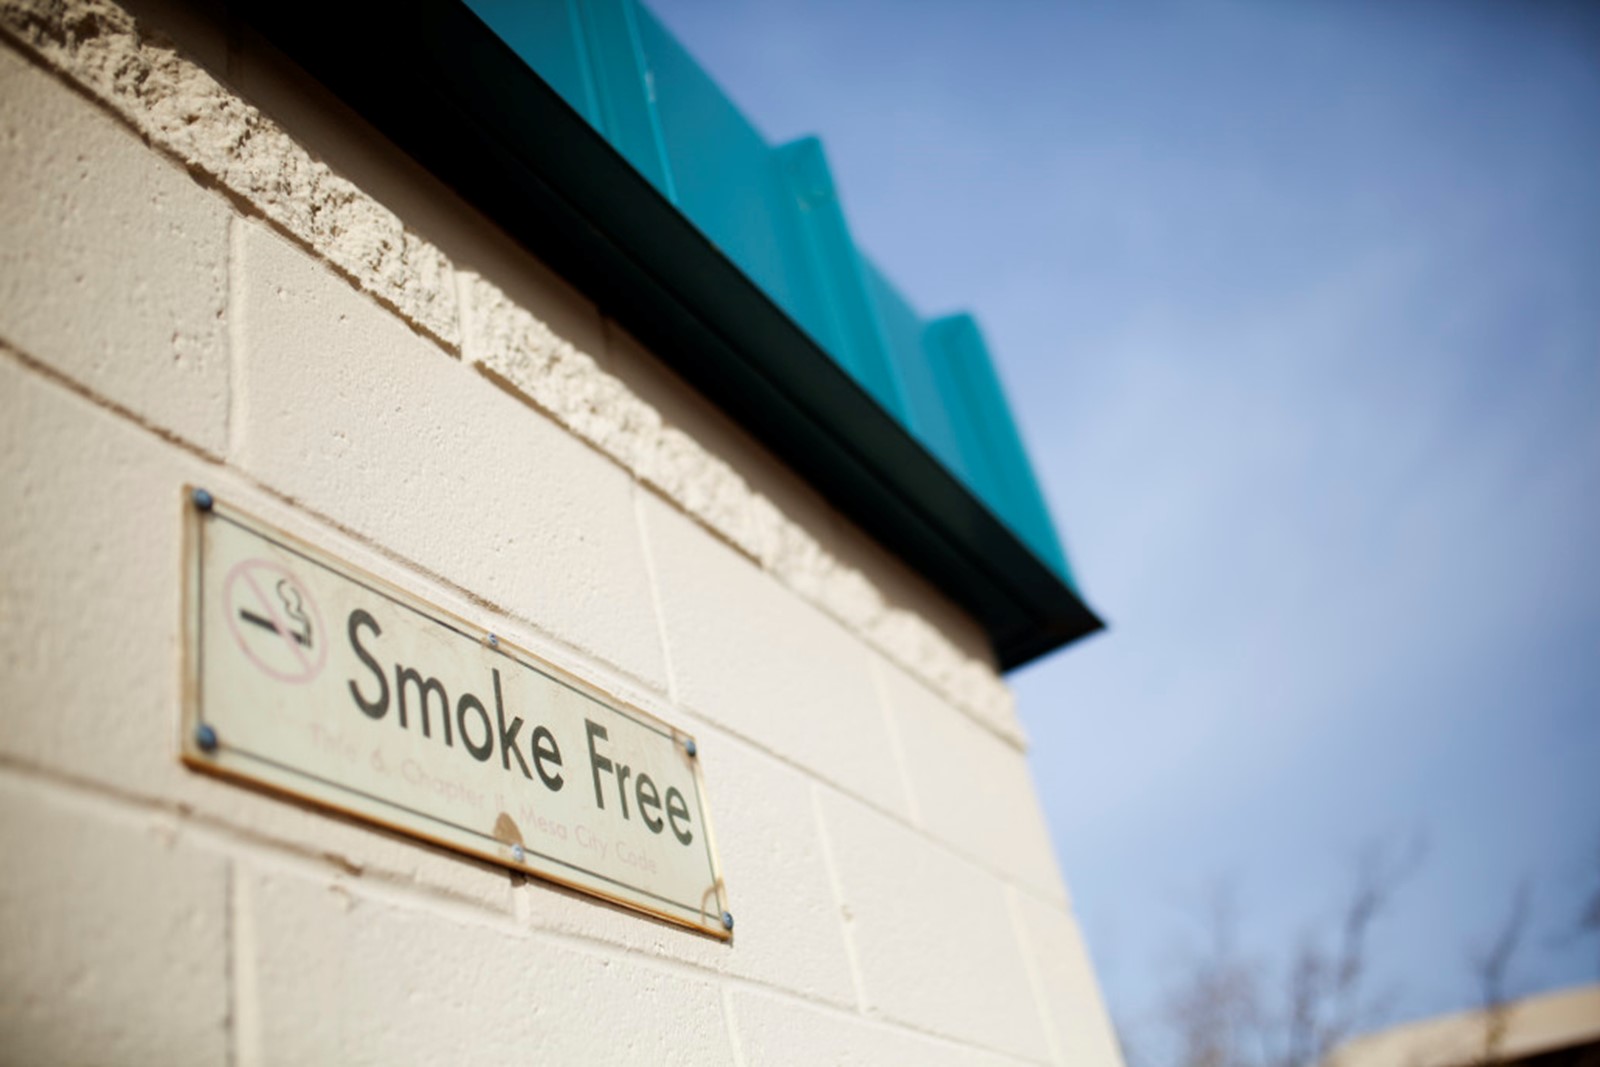 Smoke free sign on a building